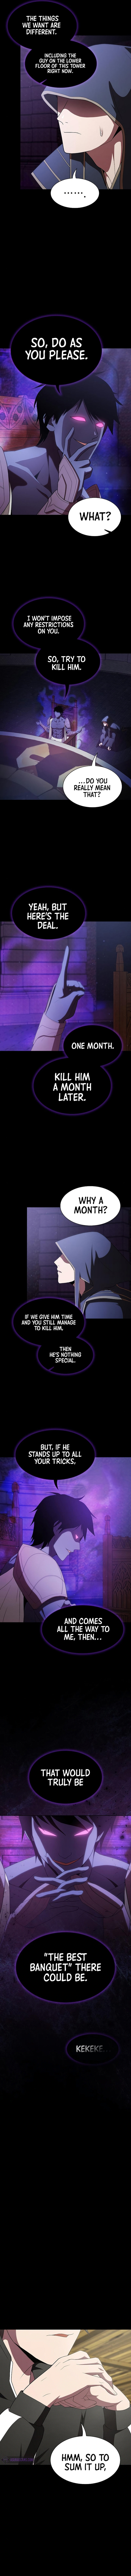 The Tutorial Tower of the Advanced Player - Chapter 107 Page 5